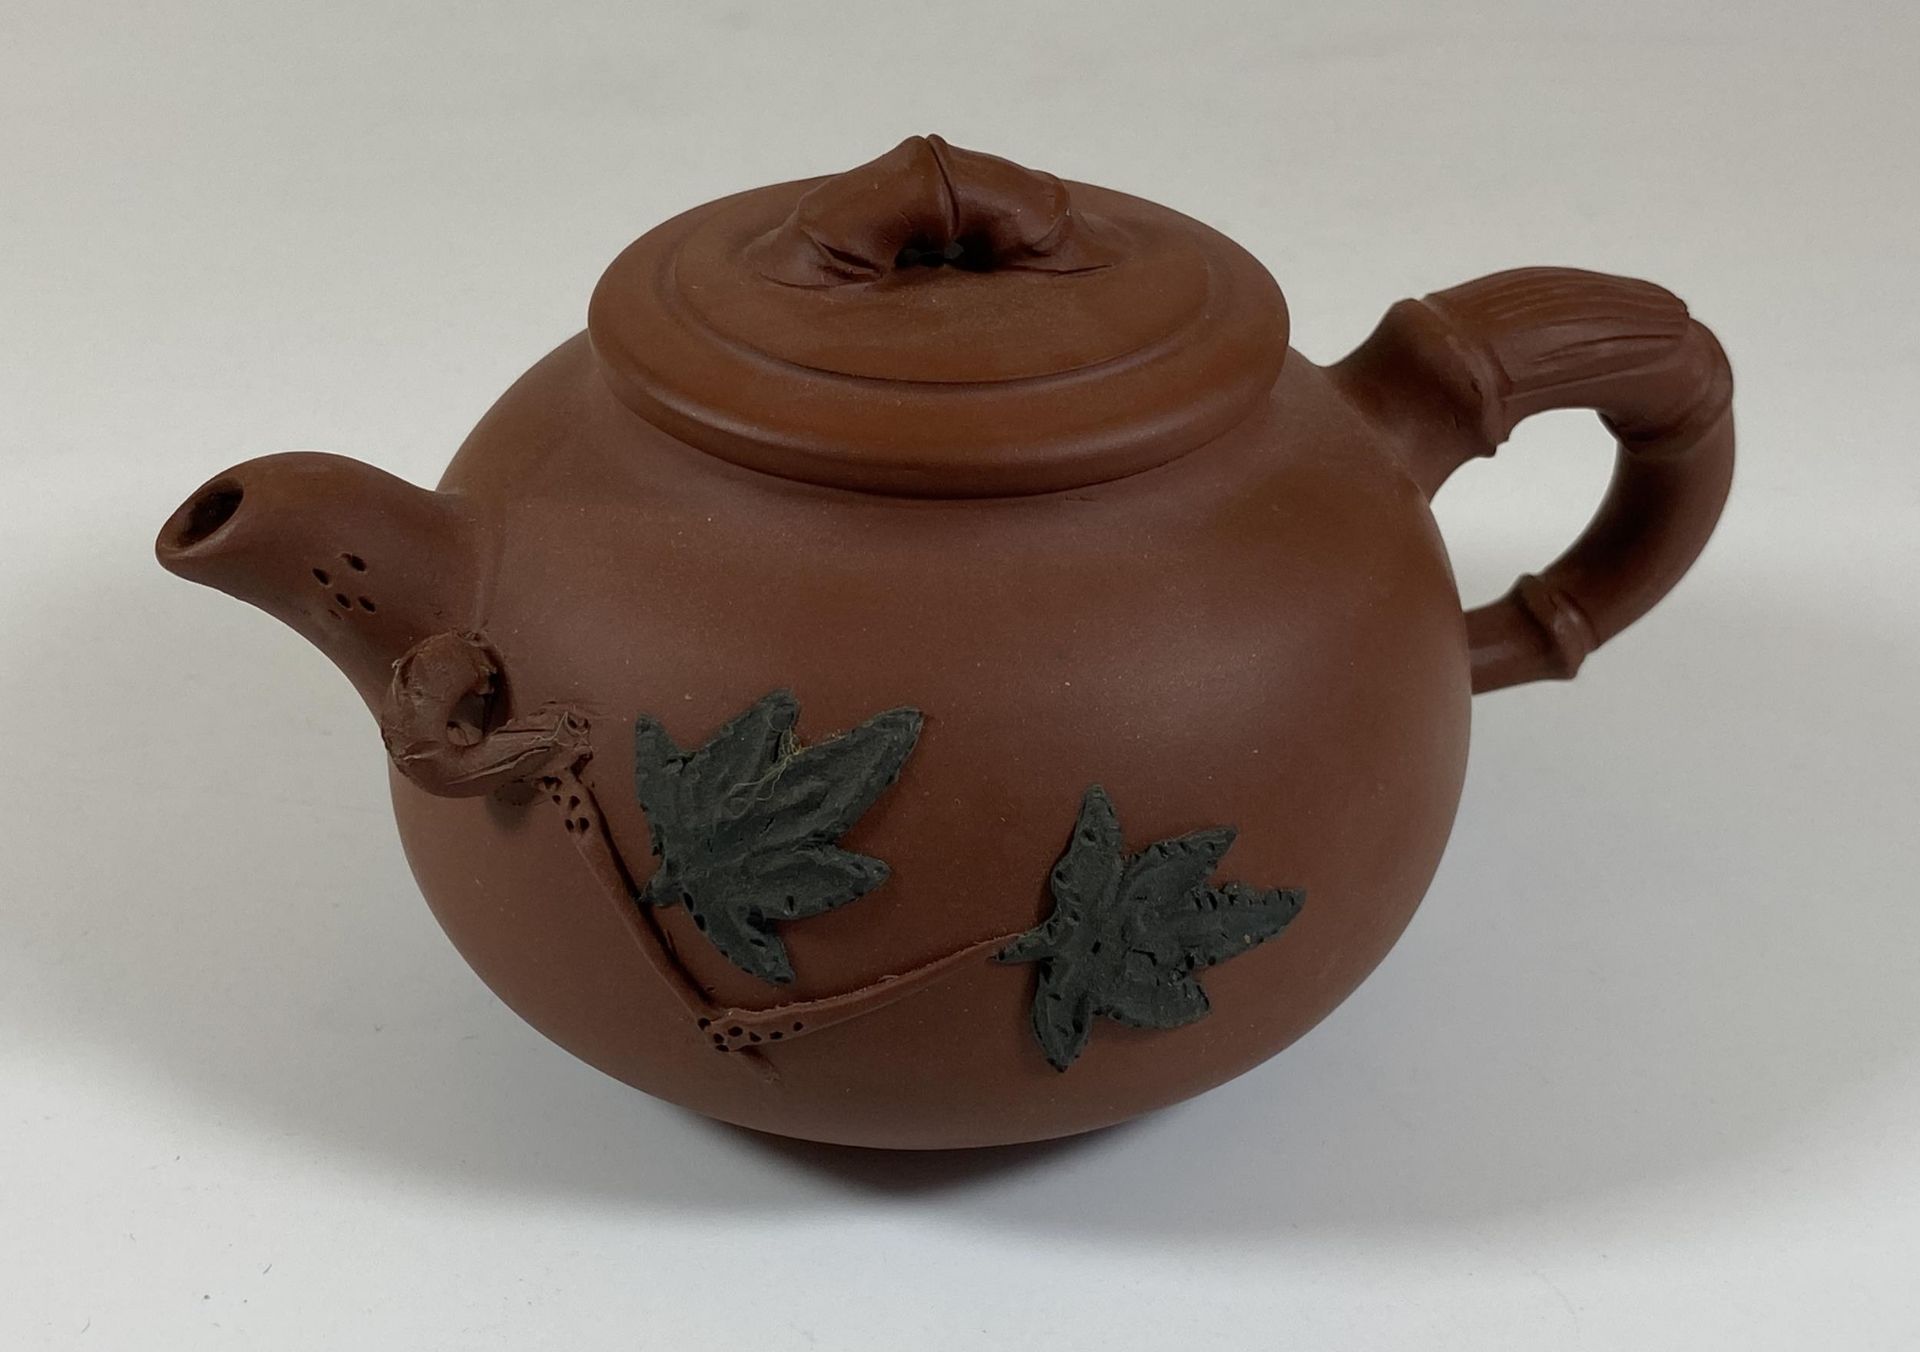 A CHINESE YIXING CLAY TEAPOT WITH FLORAL RELIEF MOULDED DESIGN, SEAL MARK TO BASE AND LID INNER,